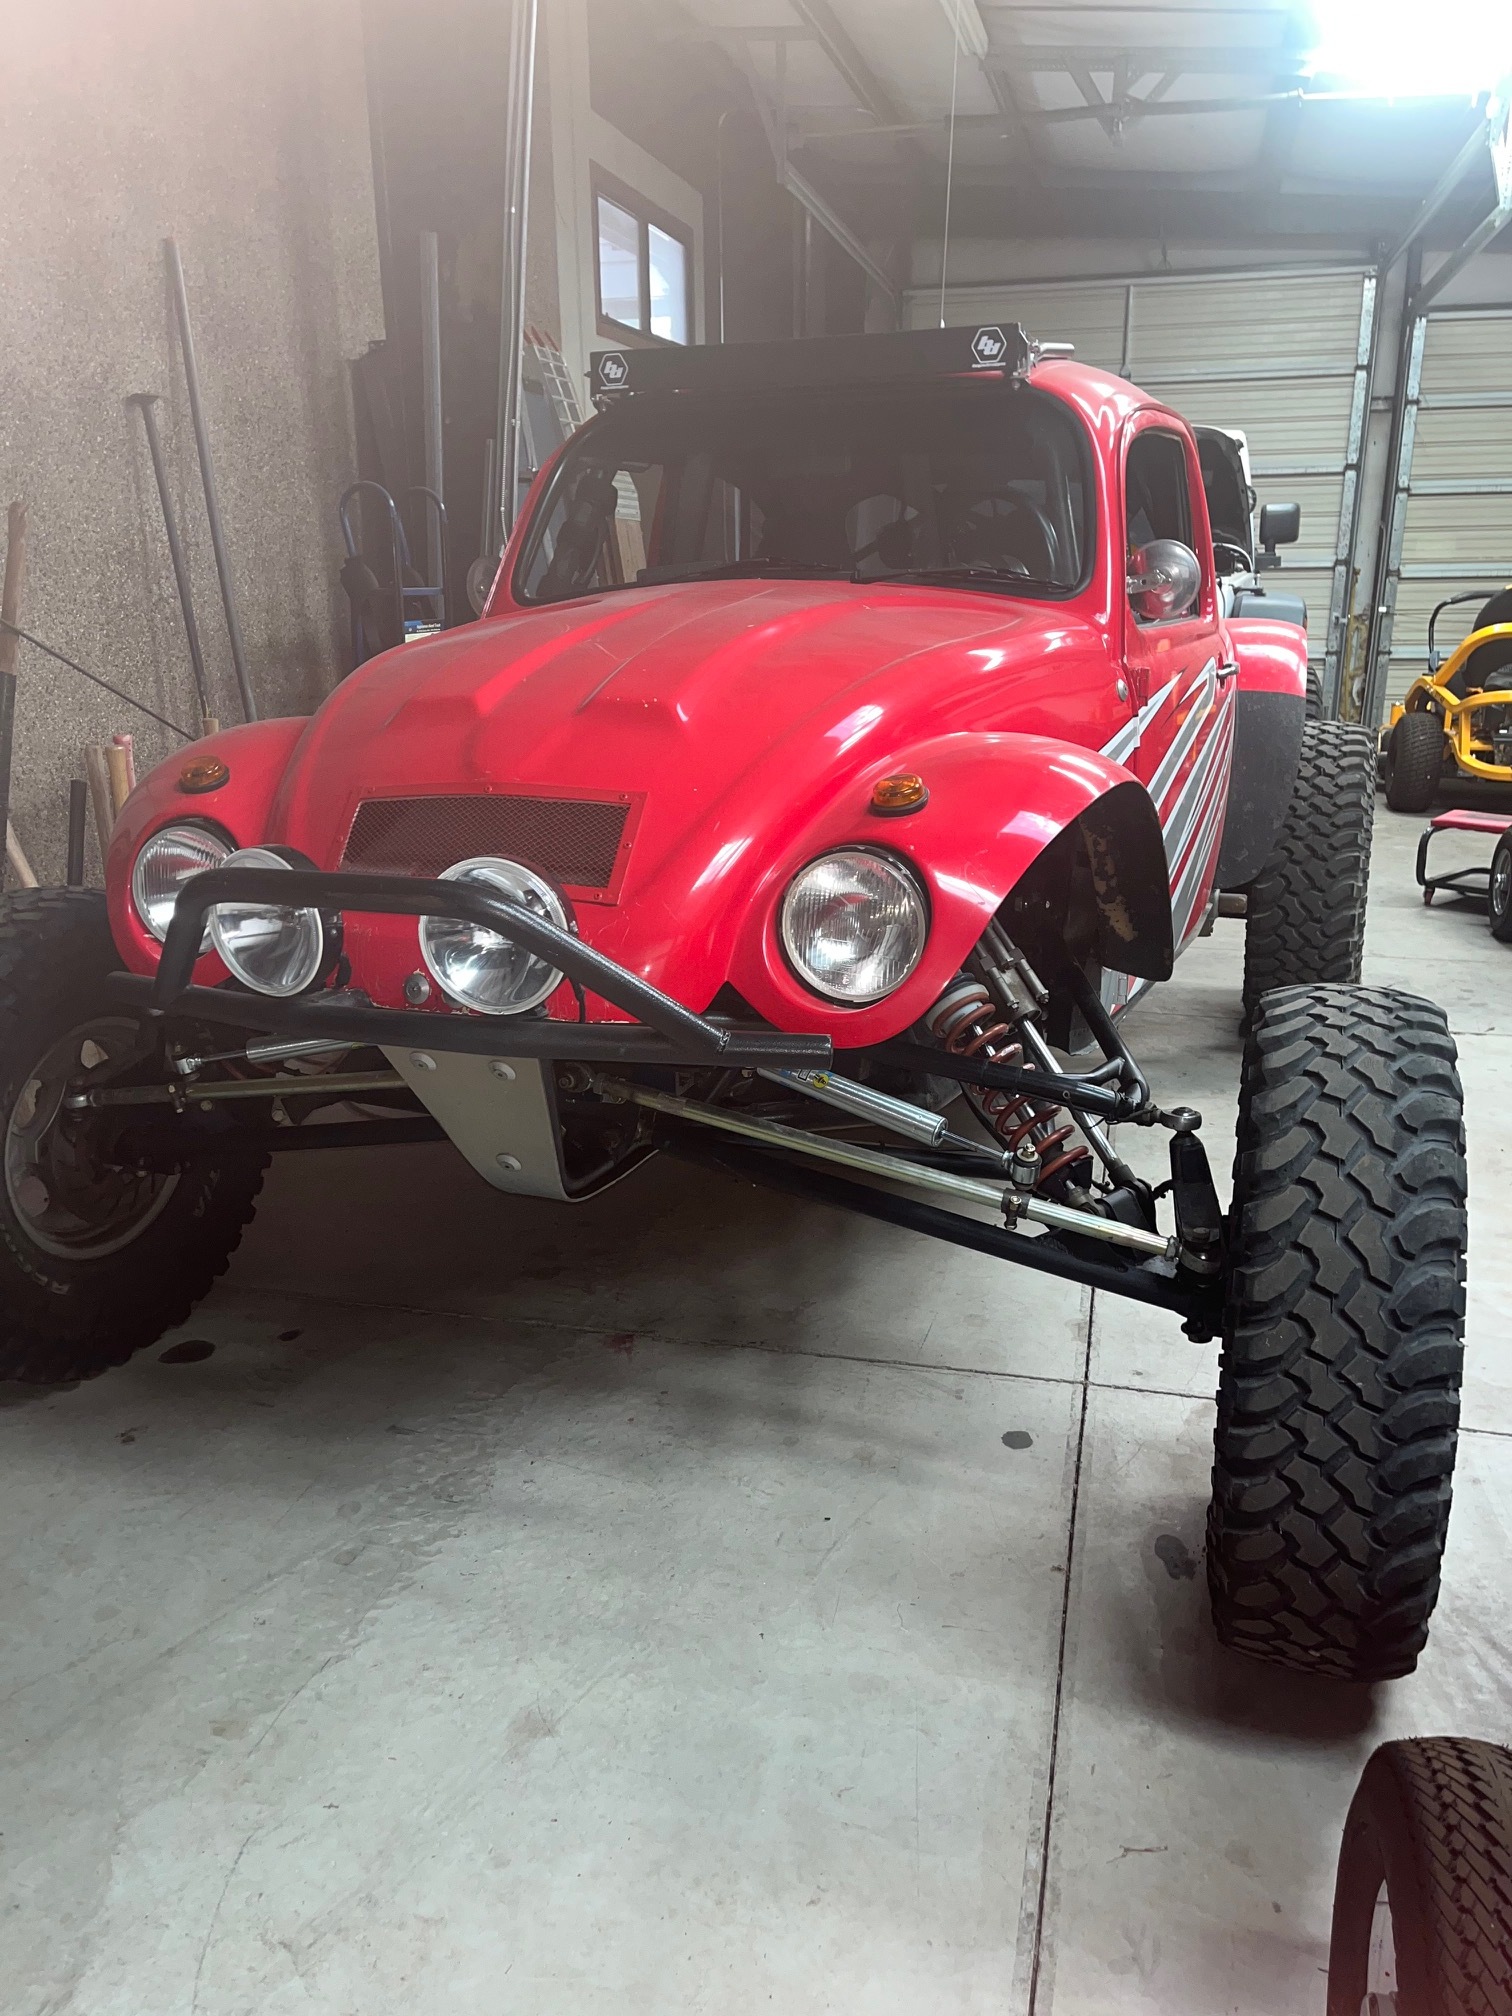 For Sale: Street Legal 1968 Baja LS1 with Mendeola transmission.  - photo2